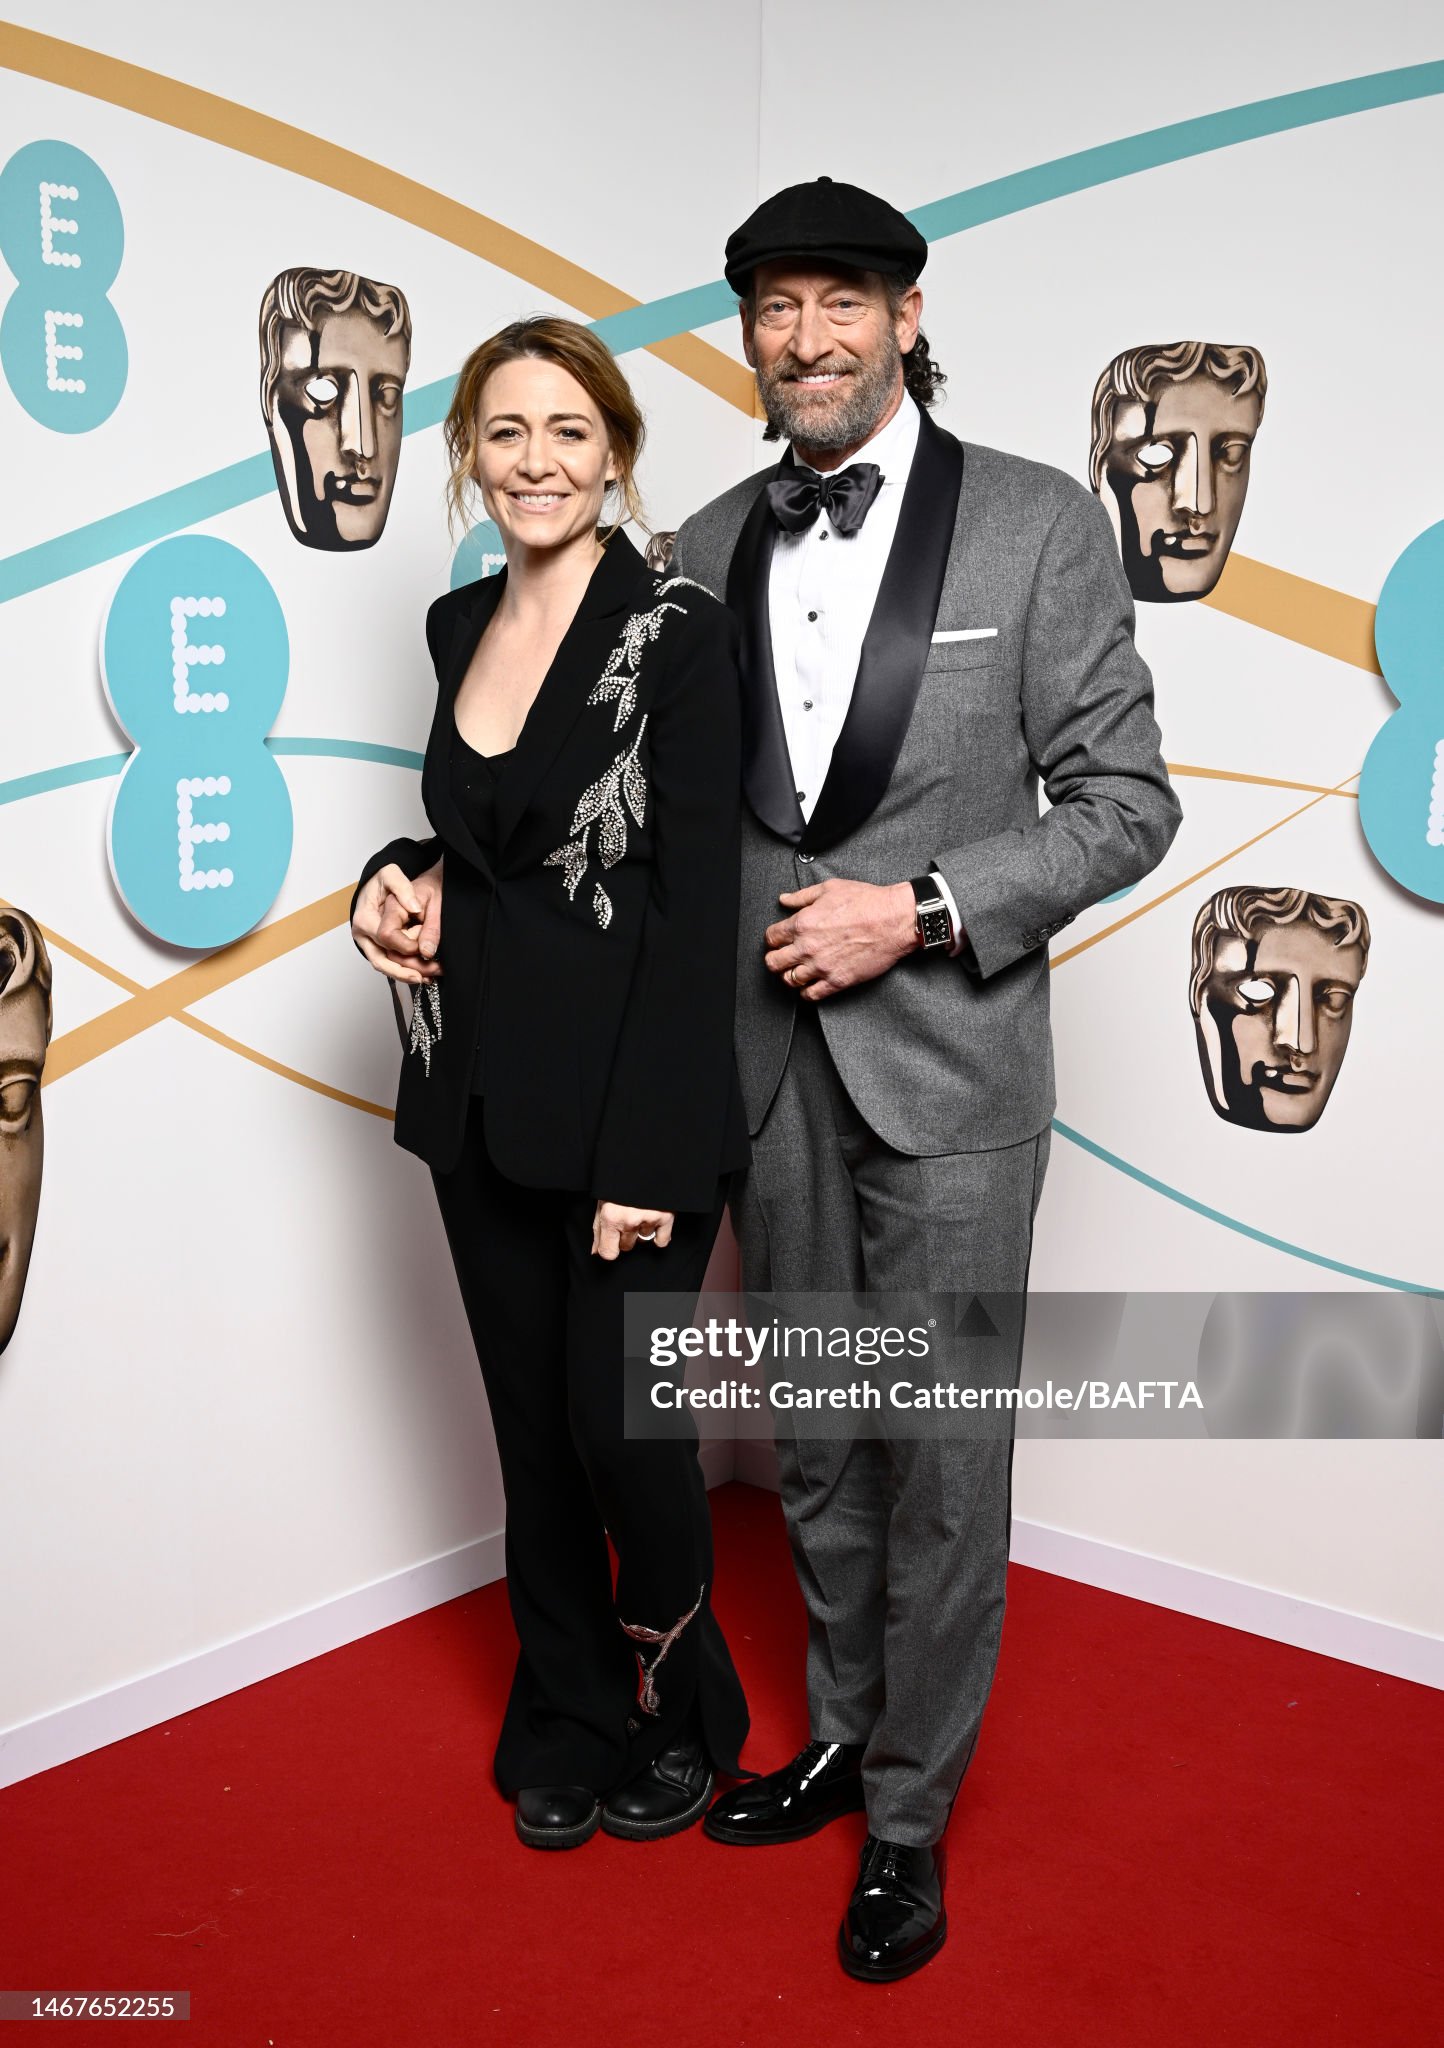 deanne-bray-and-troy-kotsur-attend-the-ee-bafta-film-awards-2023-at-the-royal-festival-hall-on.jpg